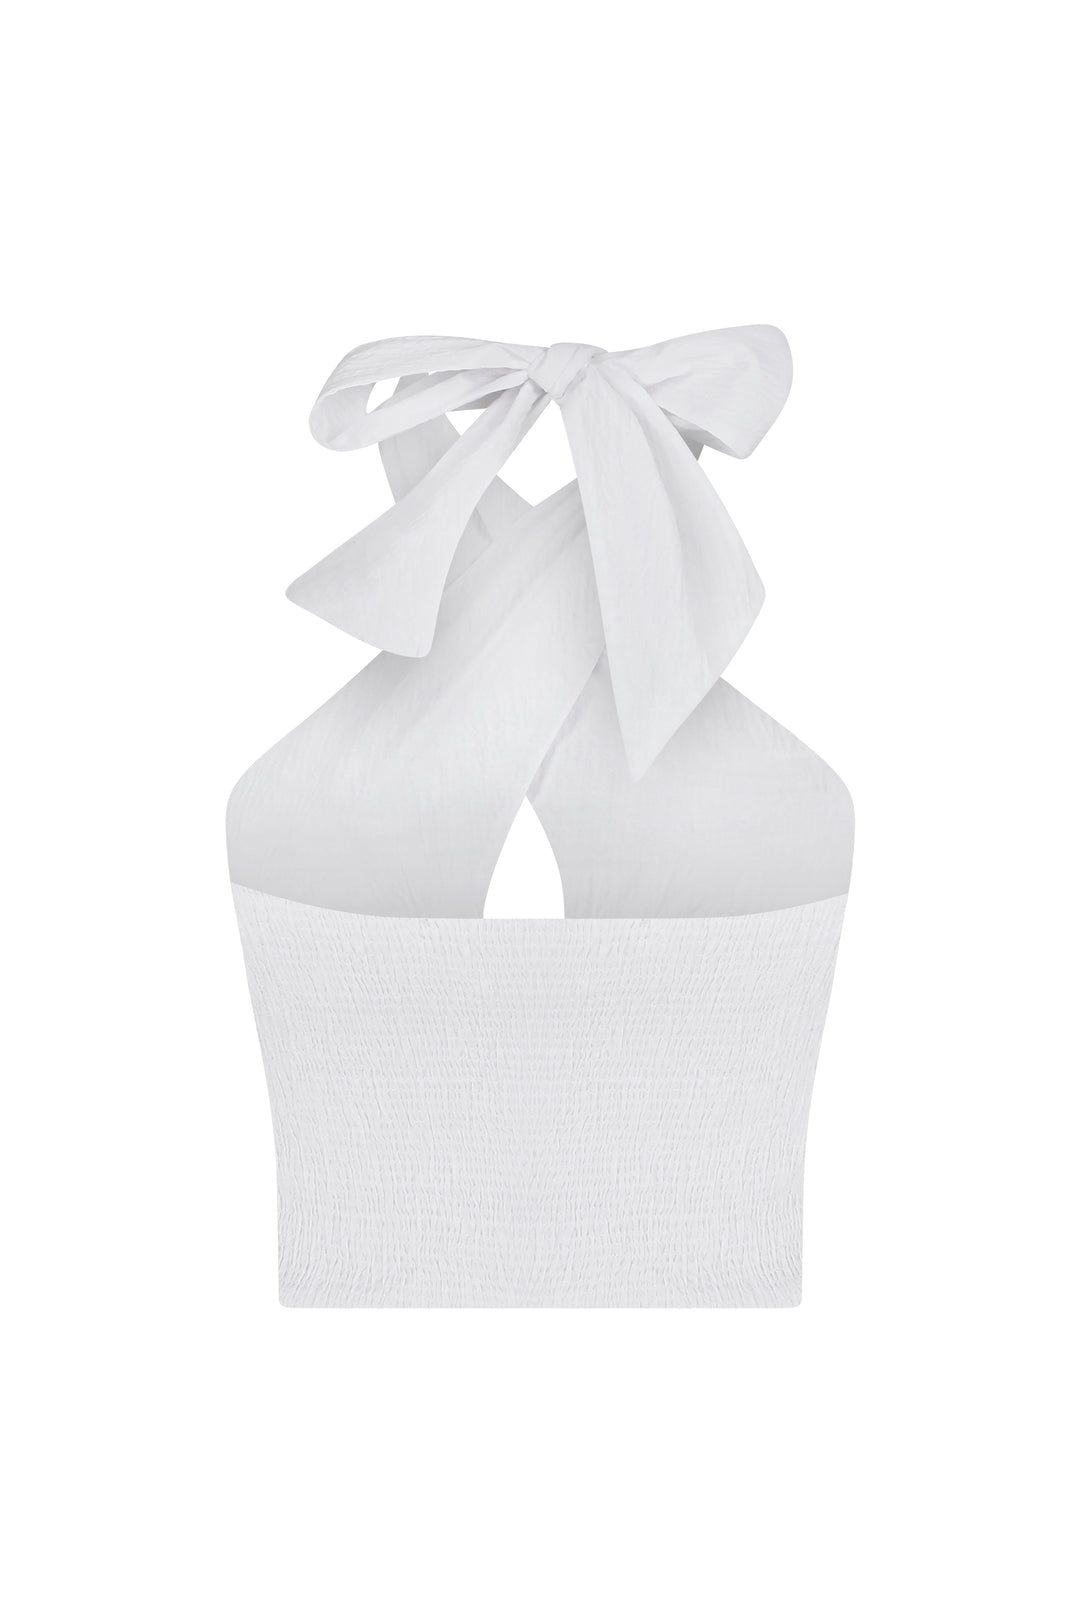 Cove - White Crinkled Bow Halter Crop Top